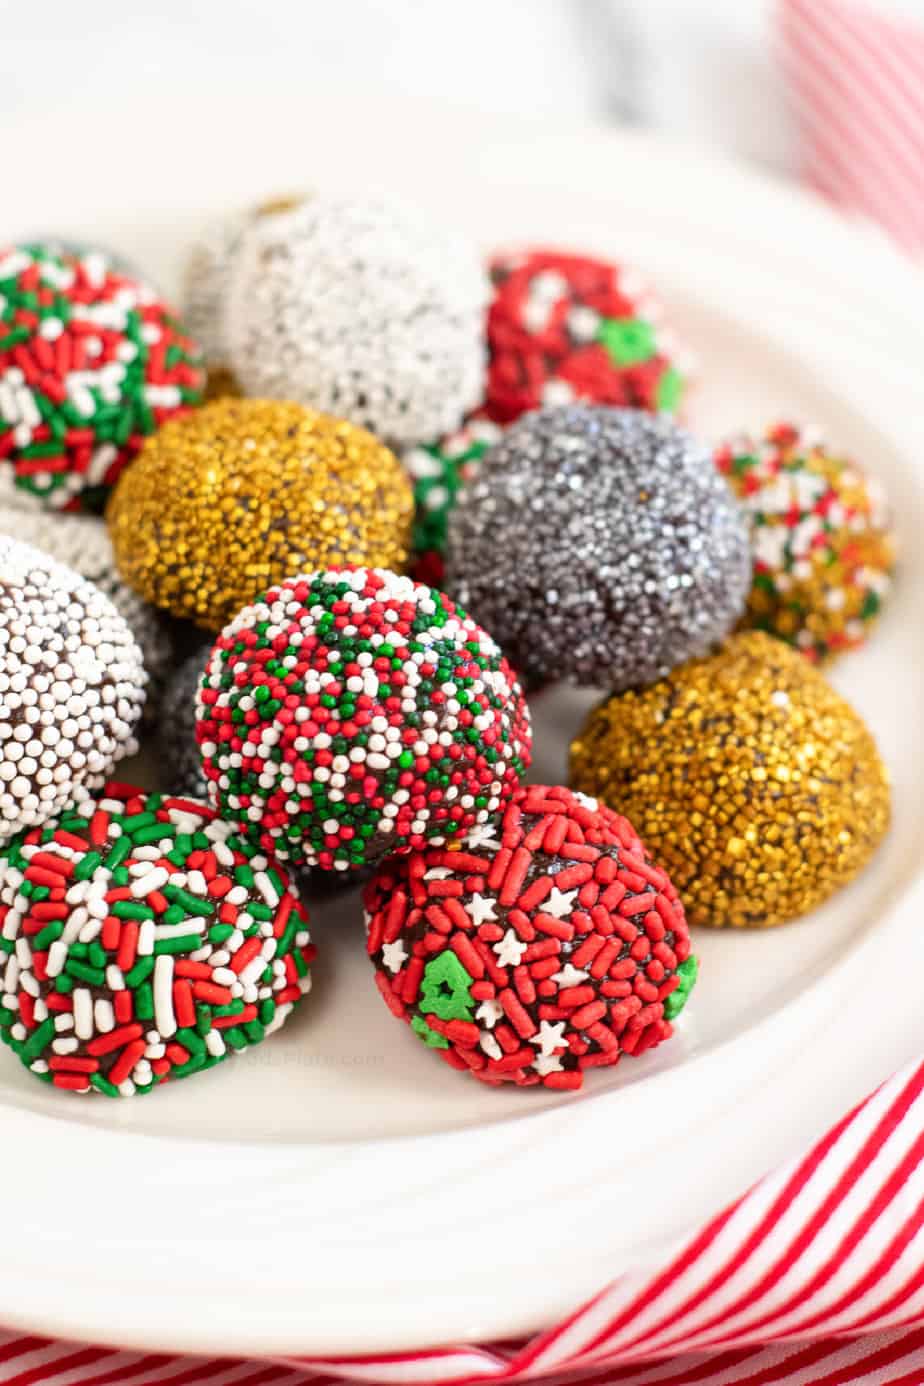 Chocolate brownie truffles piled high on a plate rolled in Christmas themed sprinkles